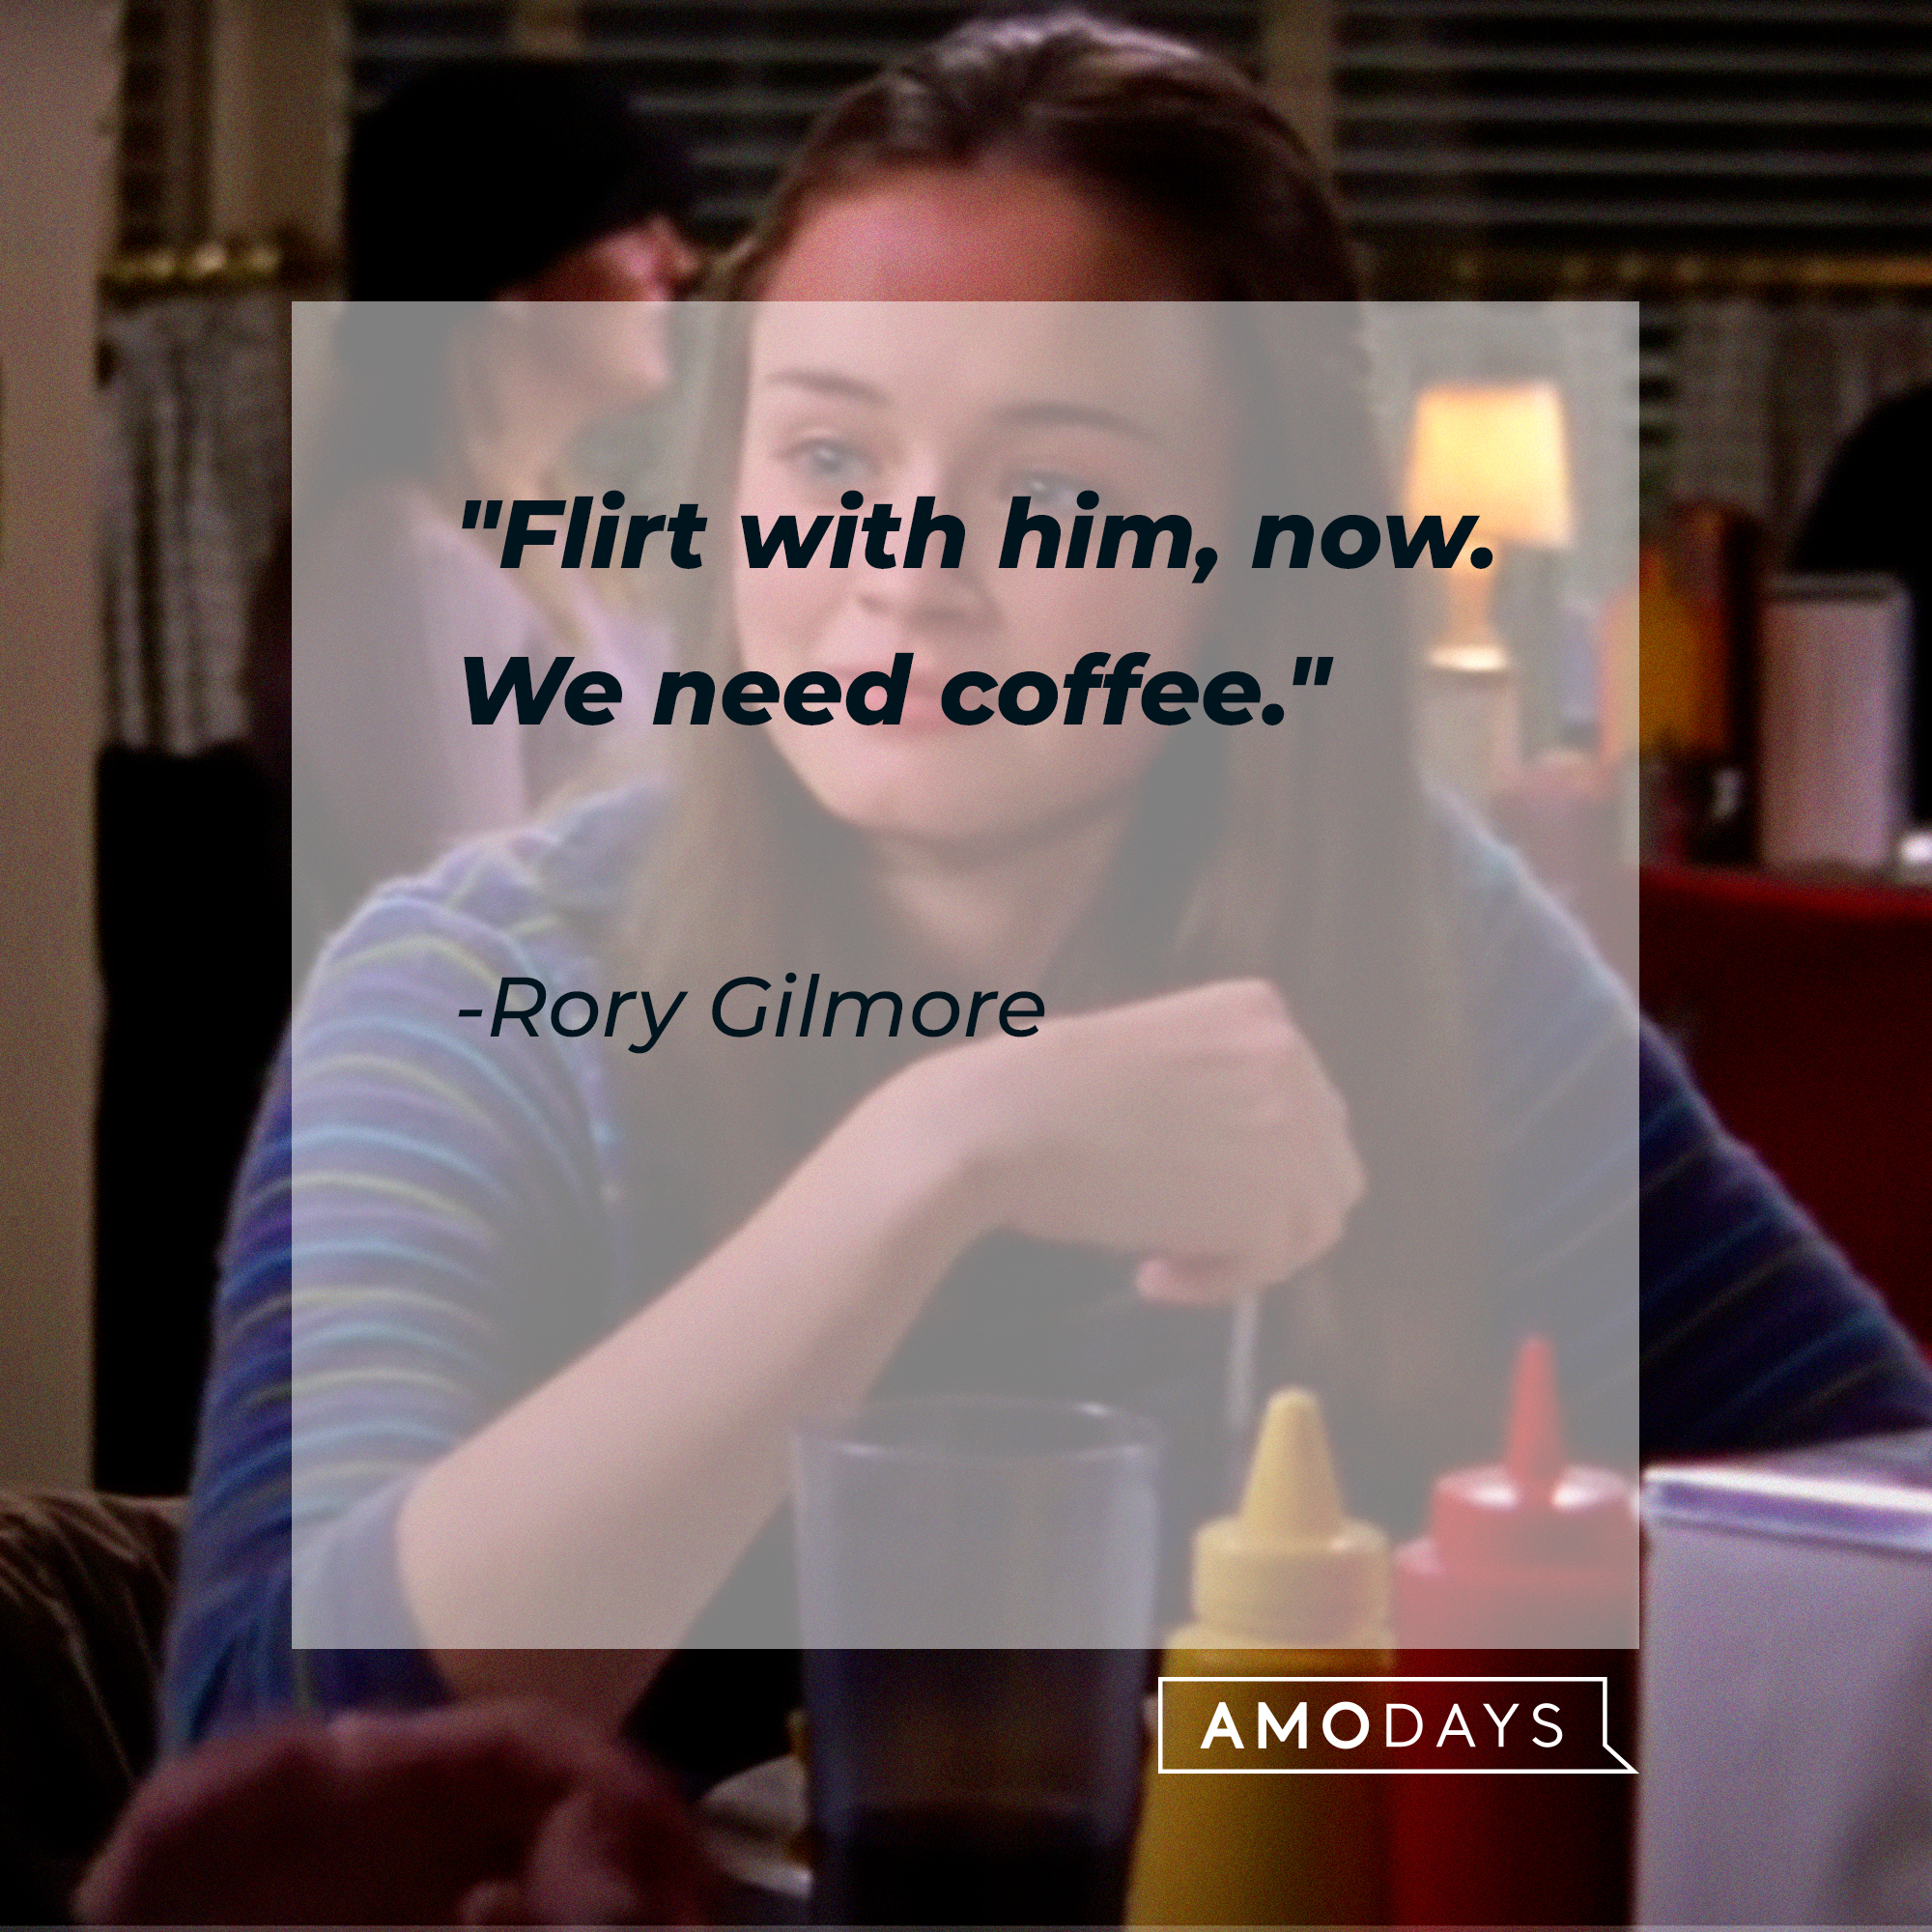 Rory Gilmore's quote: “Flirt with him, now. We need coffee." | Source: facebook.com/GilmoreGirls